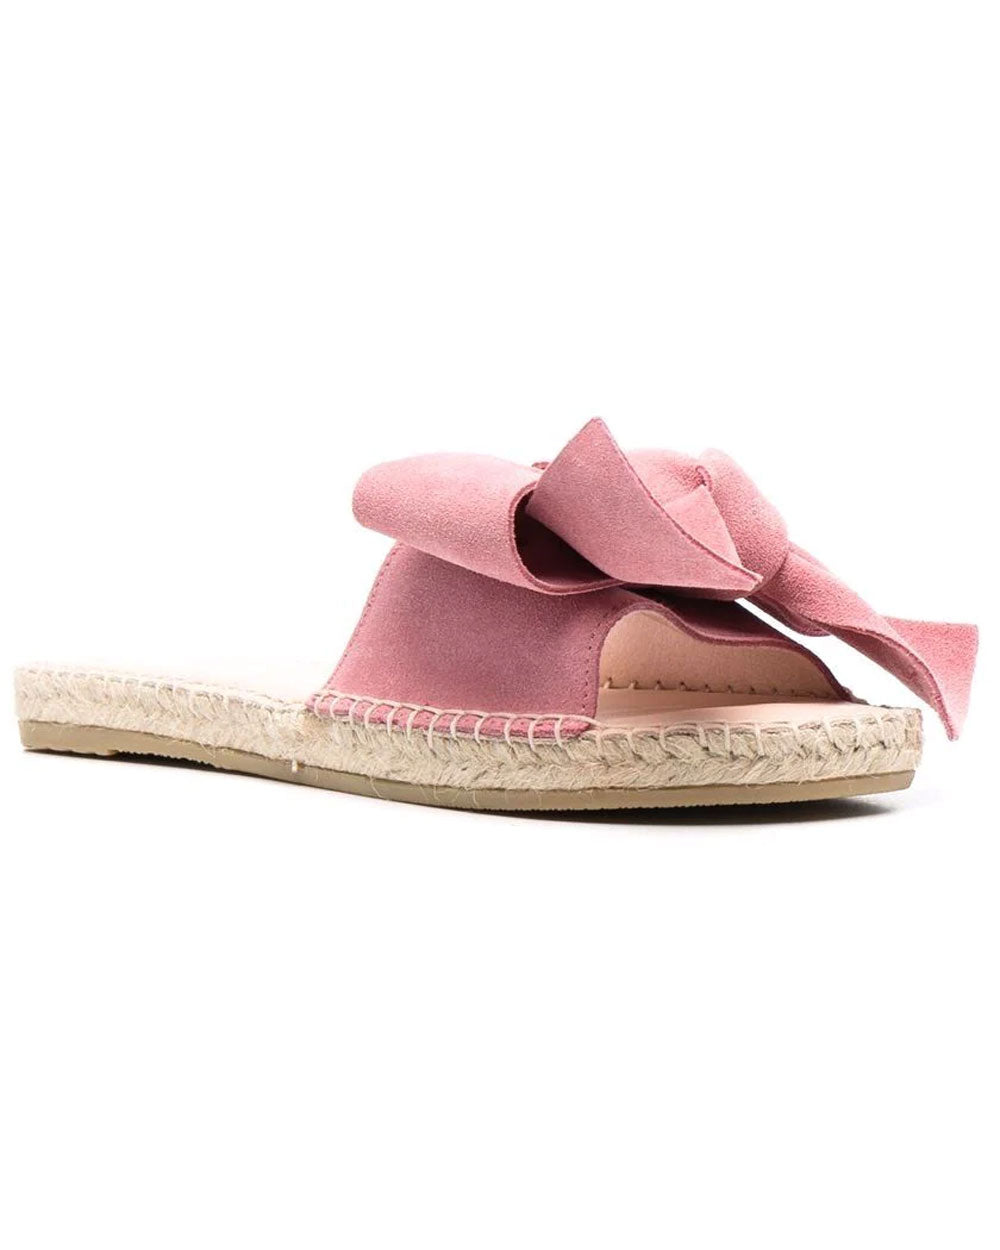 Knot Sandal in Peony